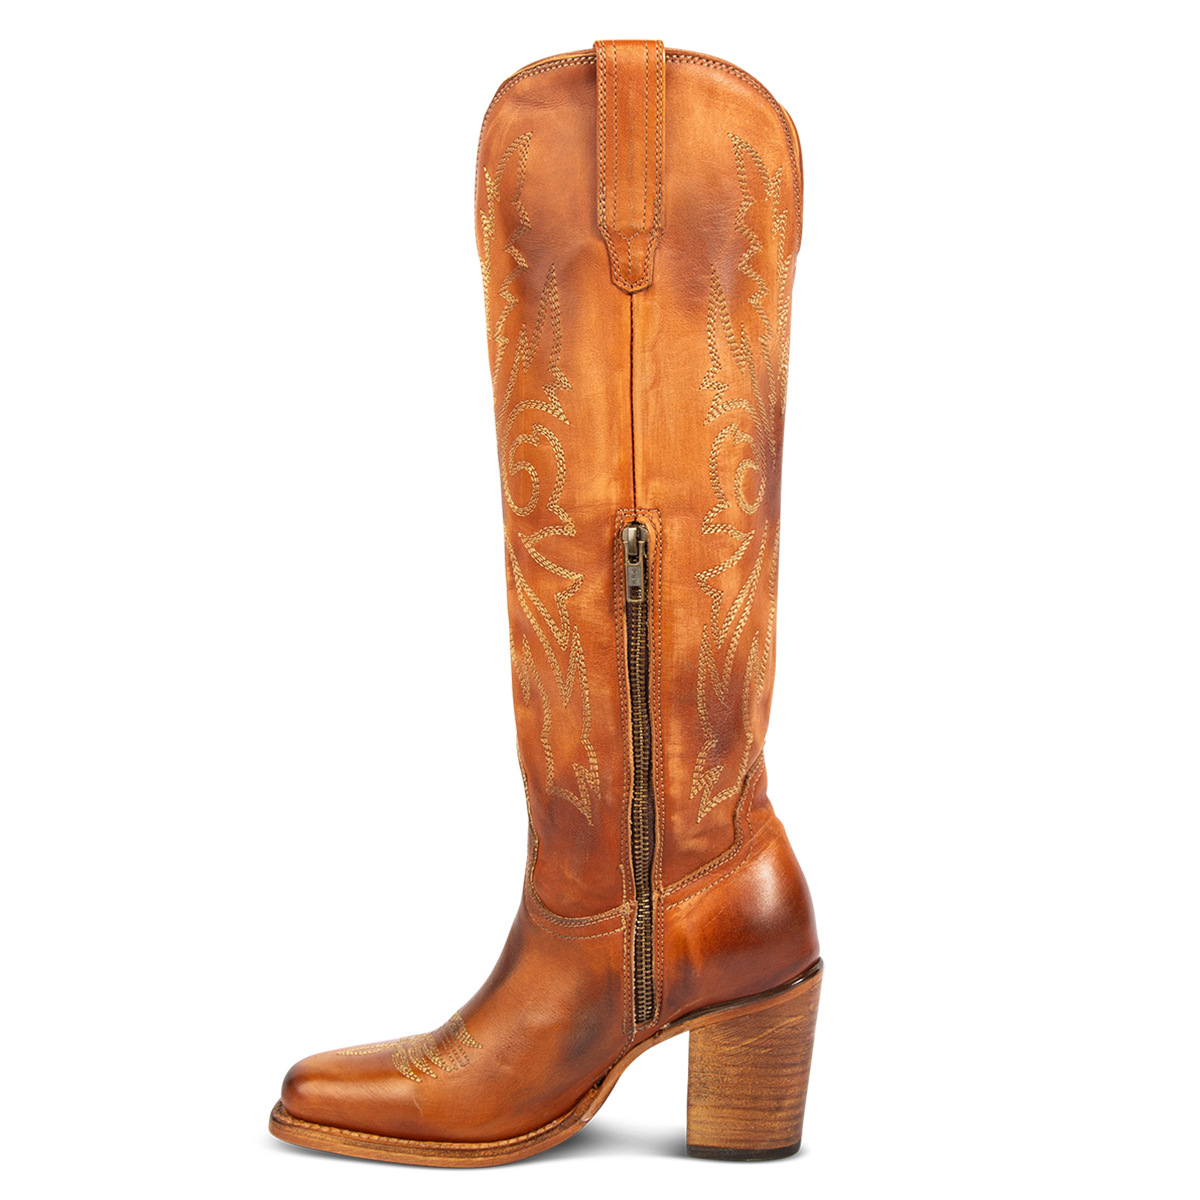 Inside view showing an inside working brass zipper, stacked heel and shaft stitch detailing on FREEBIRD women's Panama whiskey leather boot 